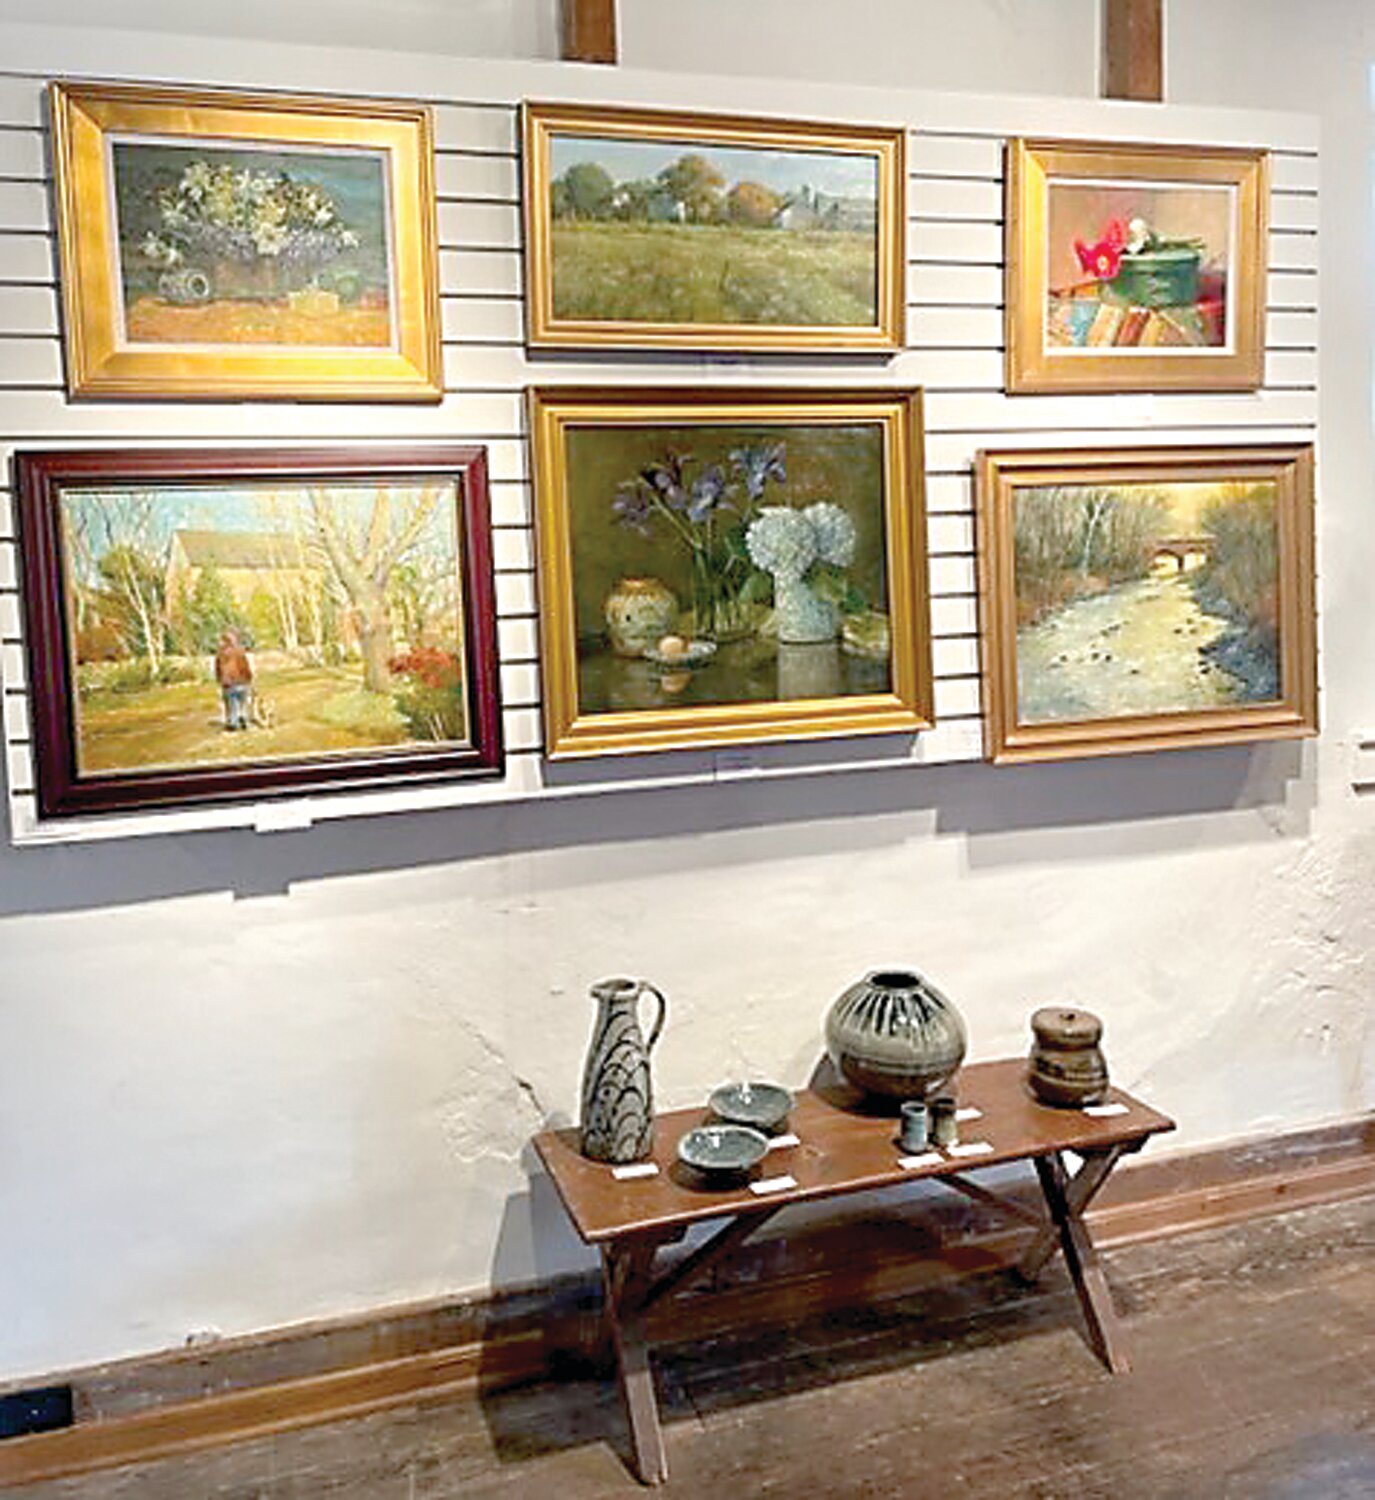 Paintings by Dot Bunn and stoneware by Willi Singleton.